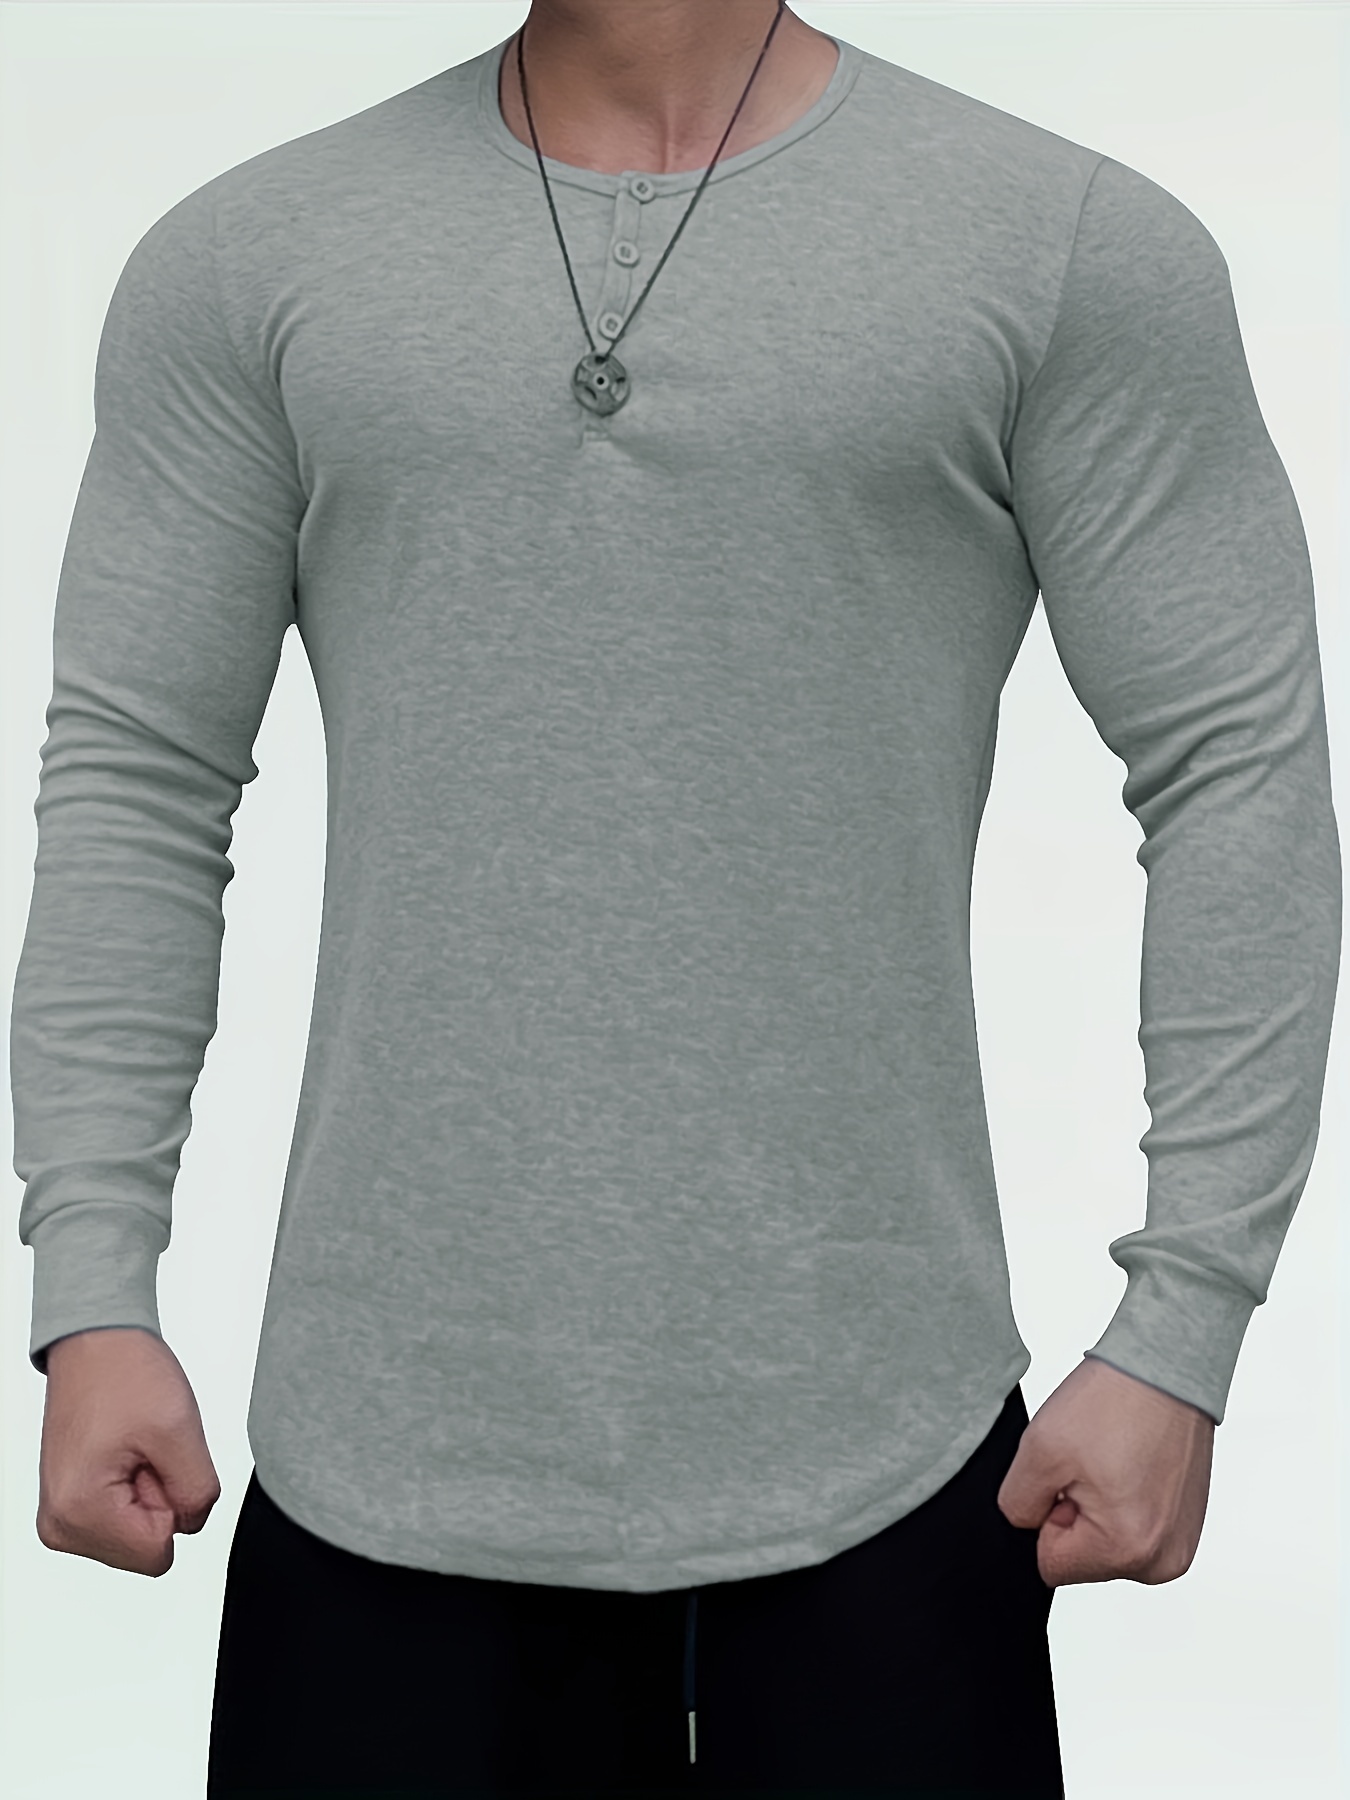 2DXuixsh Pack Of Turtle Neck Top for Men Mens Fashion Cotton T Shirt Sports  Ffitness Outdoor Solid T Shirt Tight Long Sleeve Shirt Space Apparel Cotton  Black L 